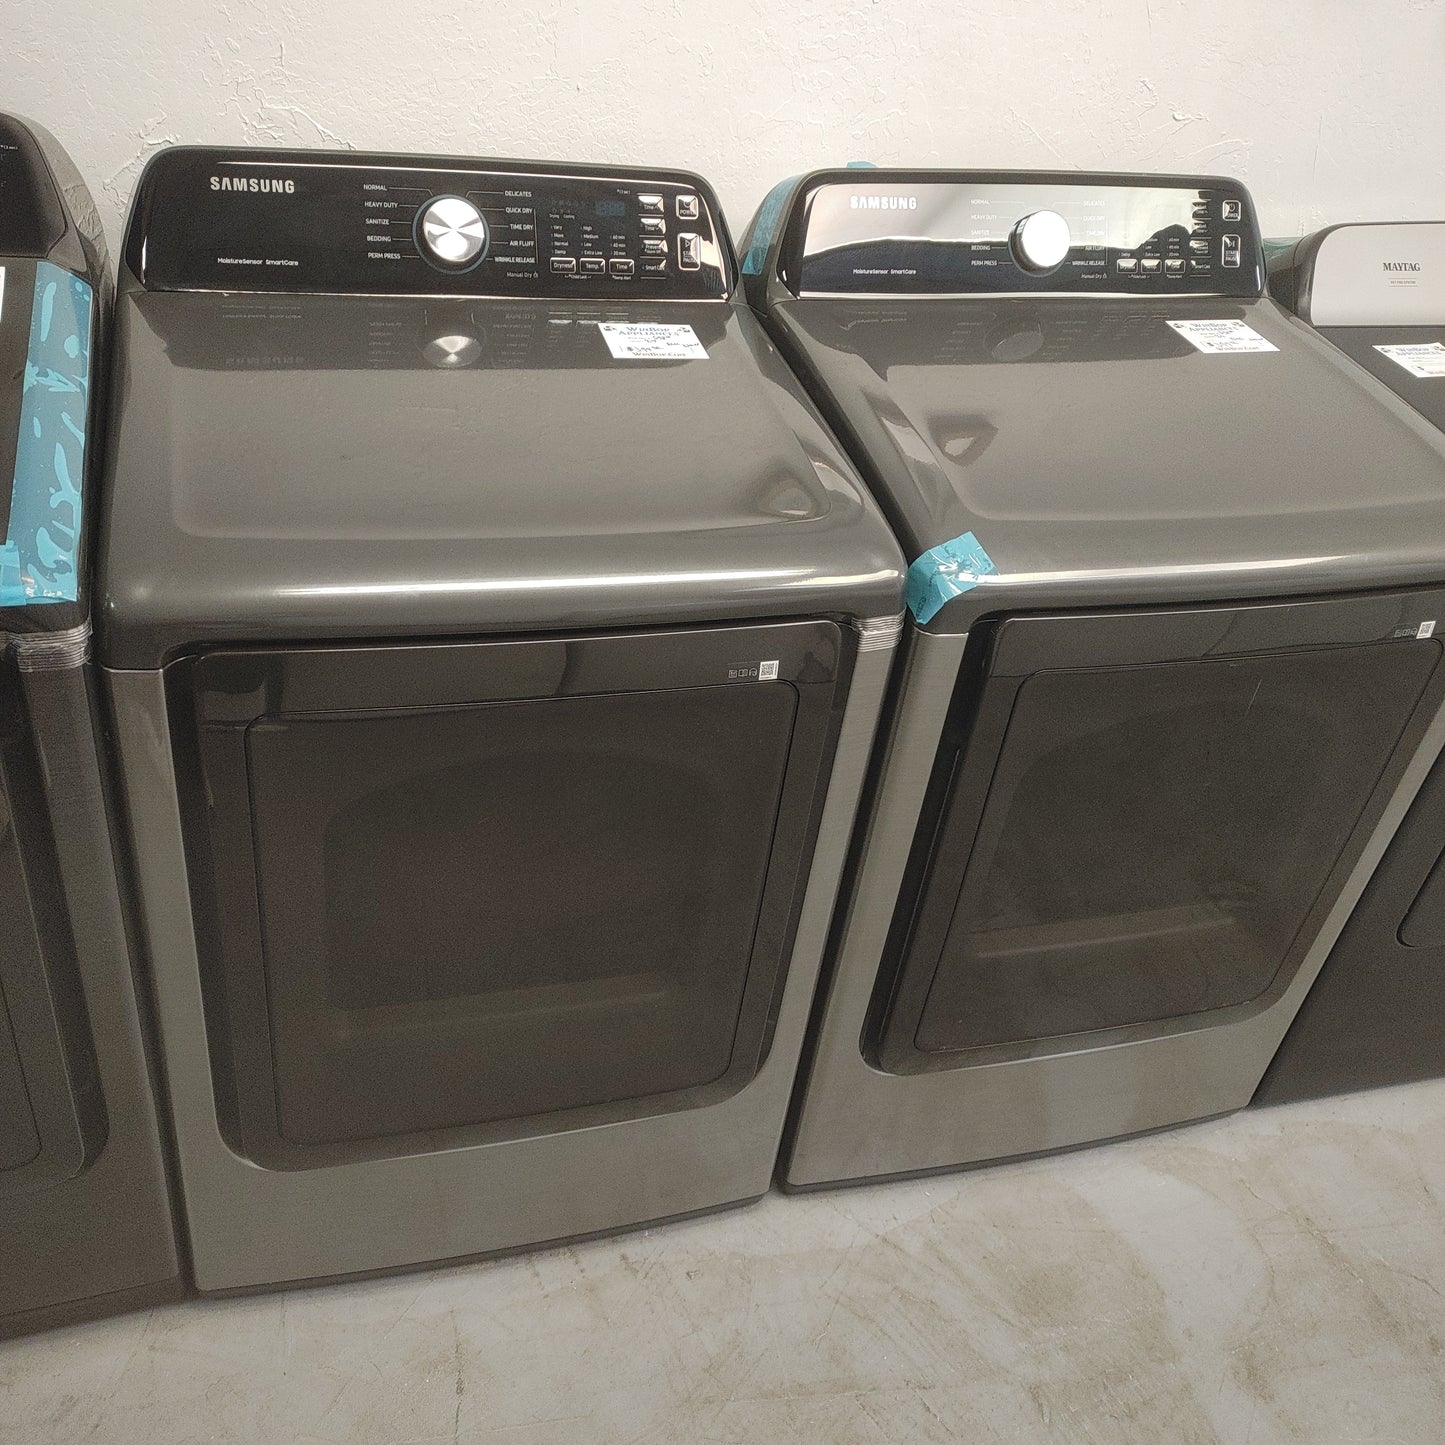 New Samsung 7.4 Cubic ft Electric Dryer